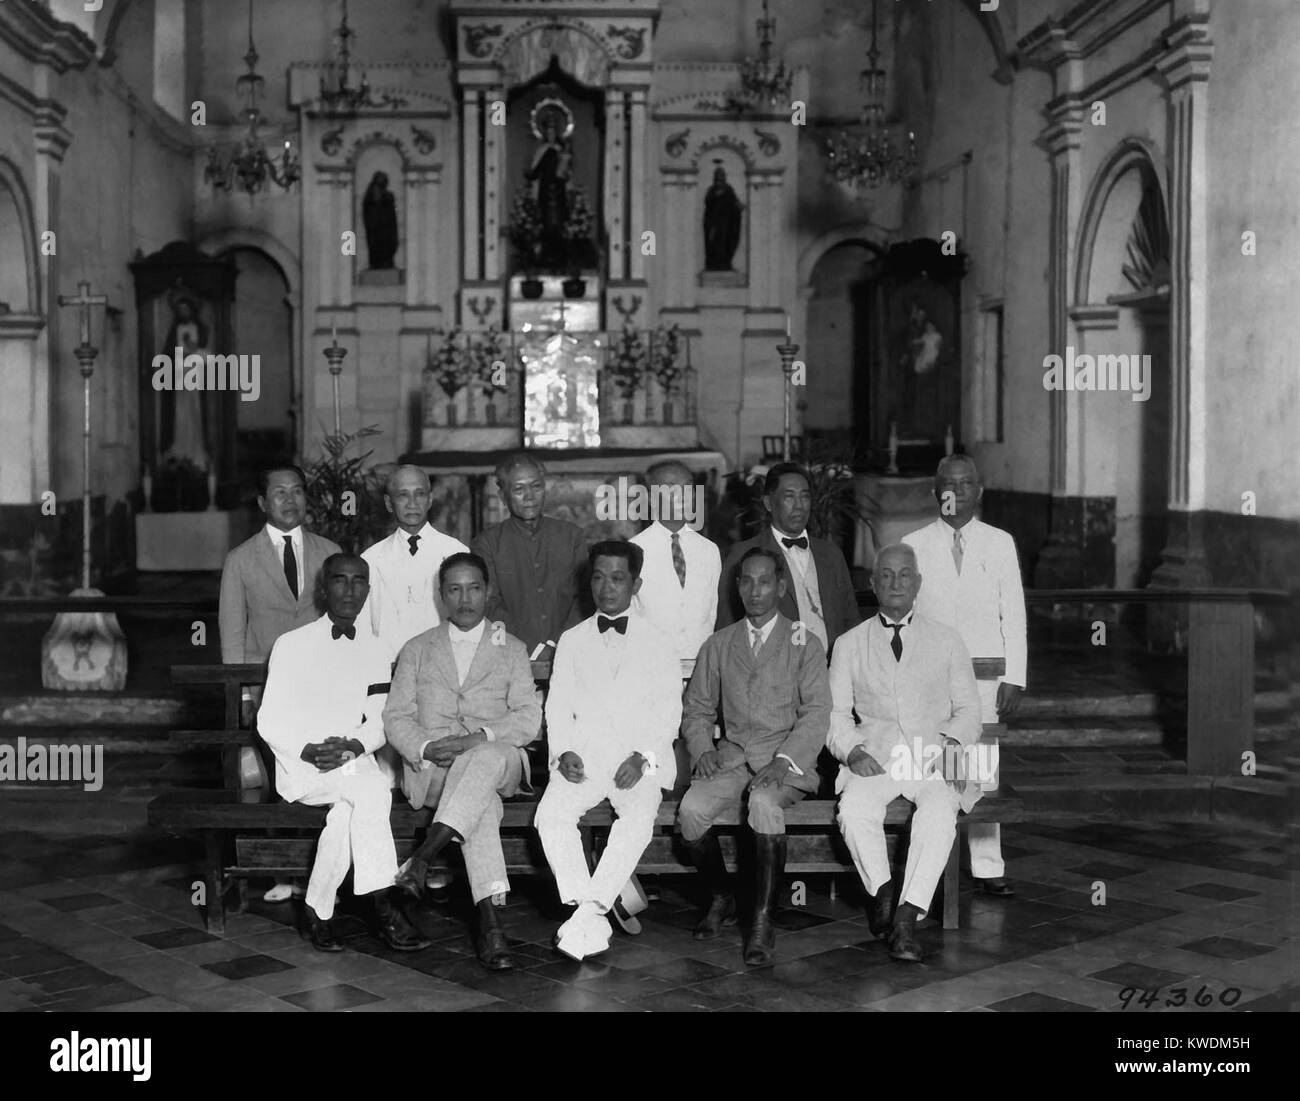 Revolutionary leaders marking the 30th anniversary of the Philippine Republic in 1929. Emilio Aguinaldo (seated, center) with ten of the delegates to the first Assembly of Representatives that passed the Constitucion Politica de la Republica Filipina on Jan. 21, 1899. They pose in Our Lady of Mount Carmel Church in Malolos, the site of the First Philippine Congress, where they drafted the constitution (BSLOC 2017 10 93) Stock Photo